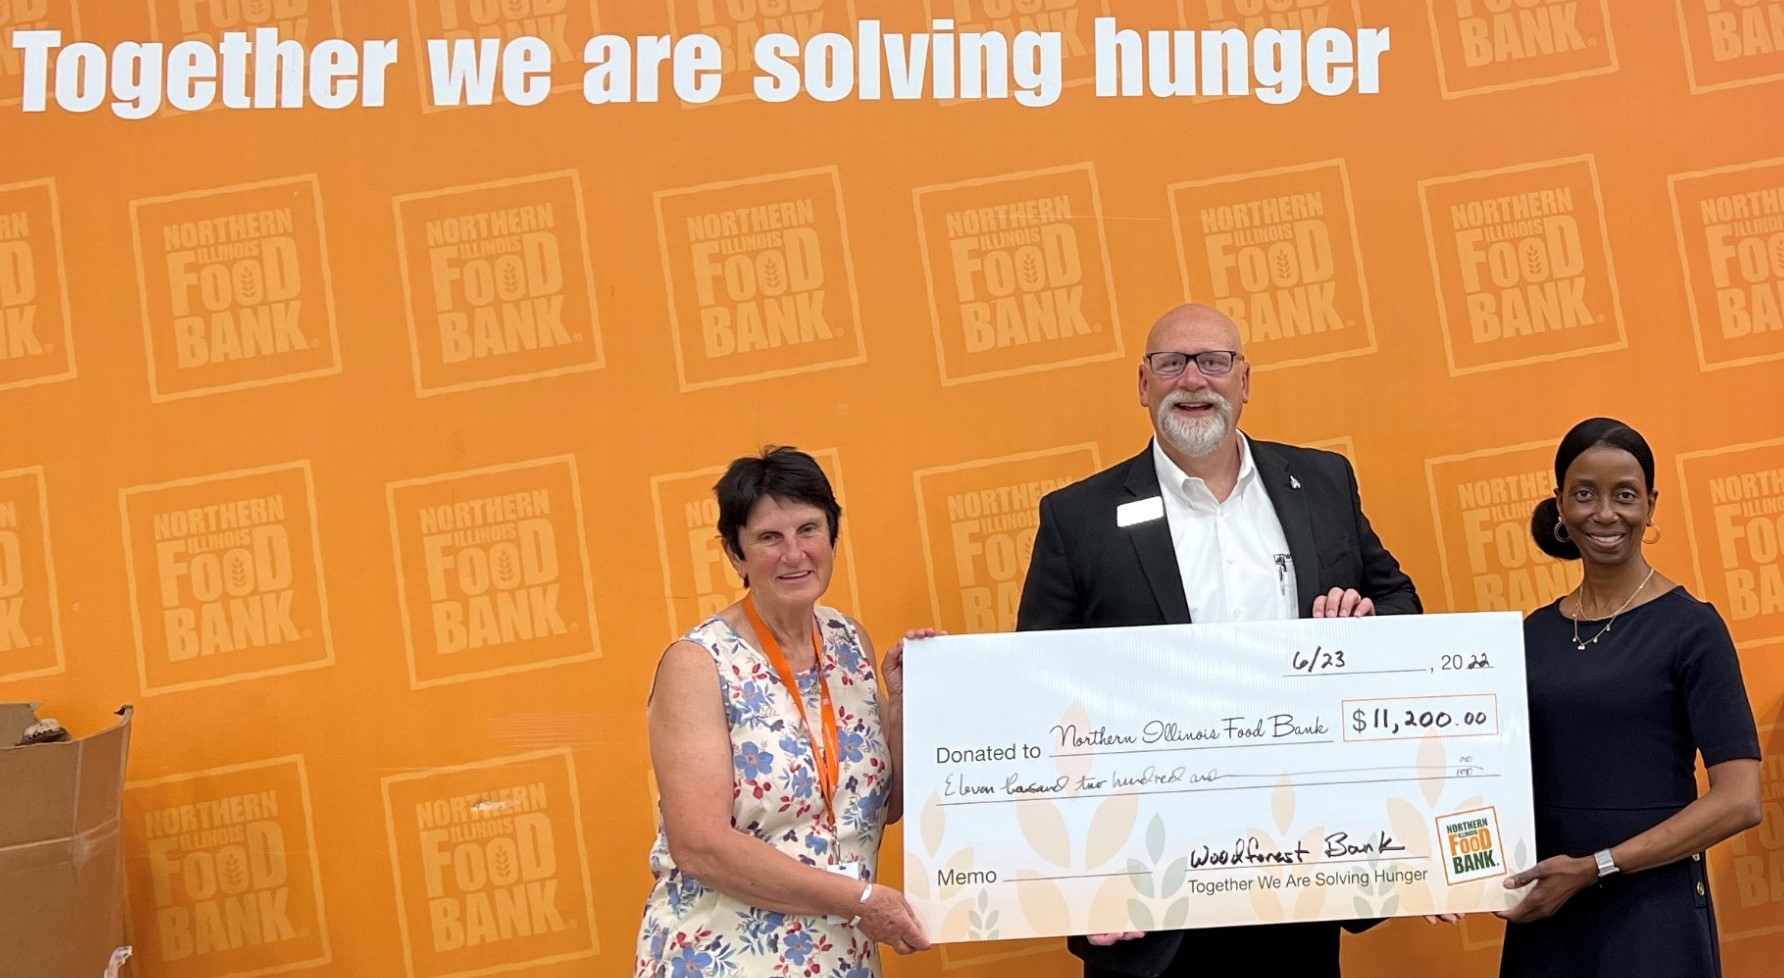 Northern Illinois Food Bank received a $11,200.00 donation from WCF.